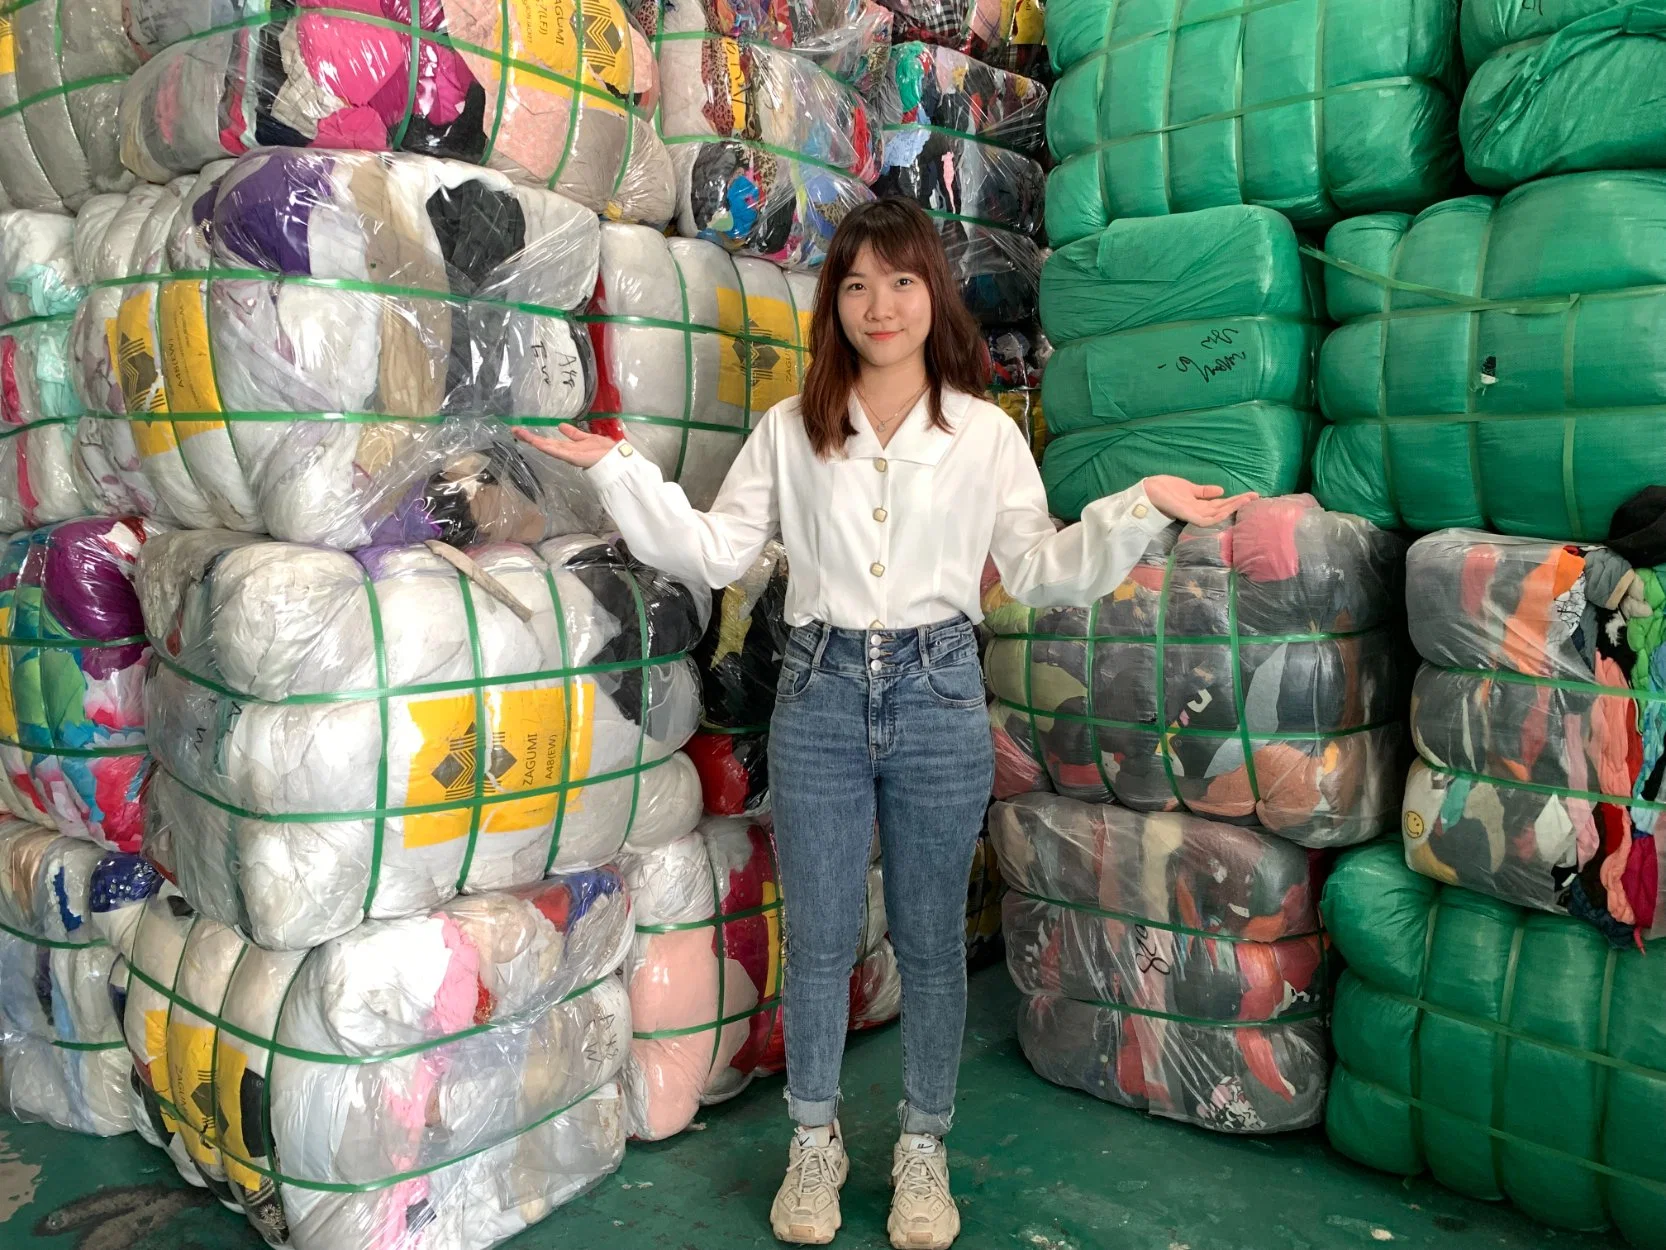 Container Wholesale Second Hand Clothing Fashion Clothing Children Spring Wear Korean Used Clothing Suppliers Vintage Wholesale Bales Used Clothing in Bales